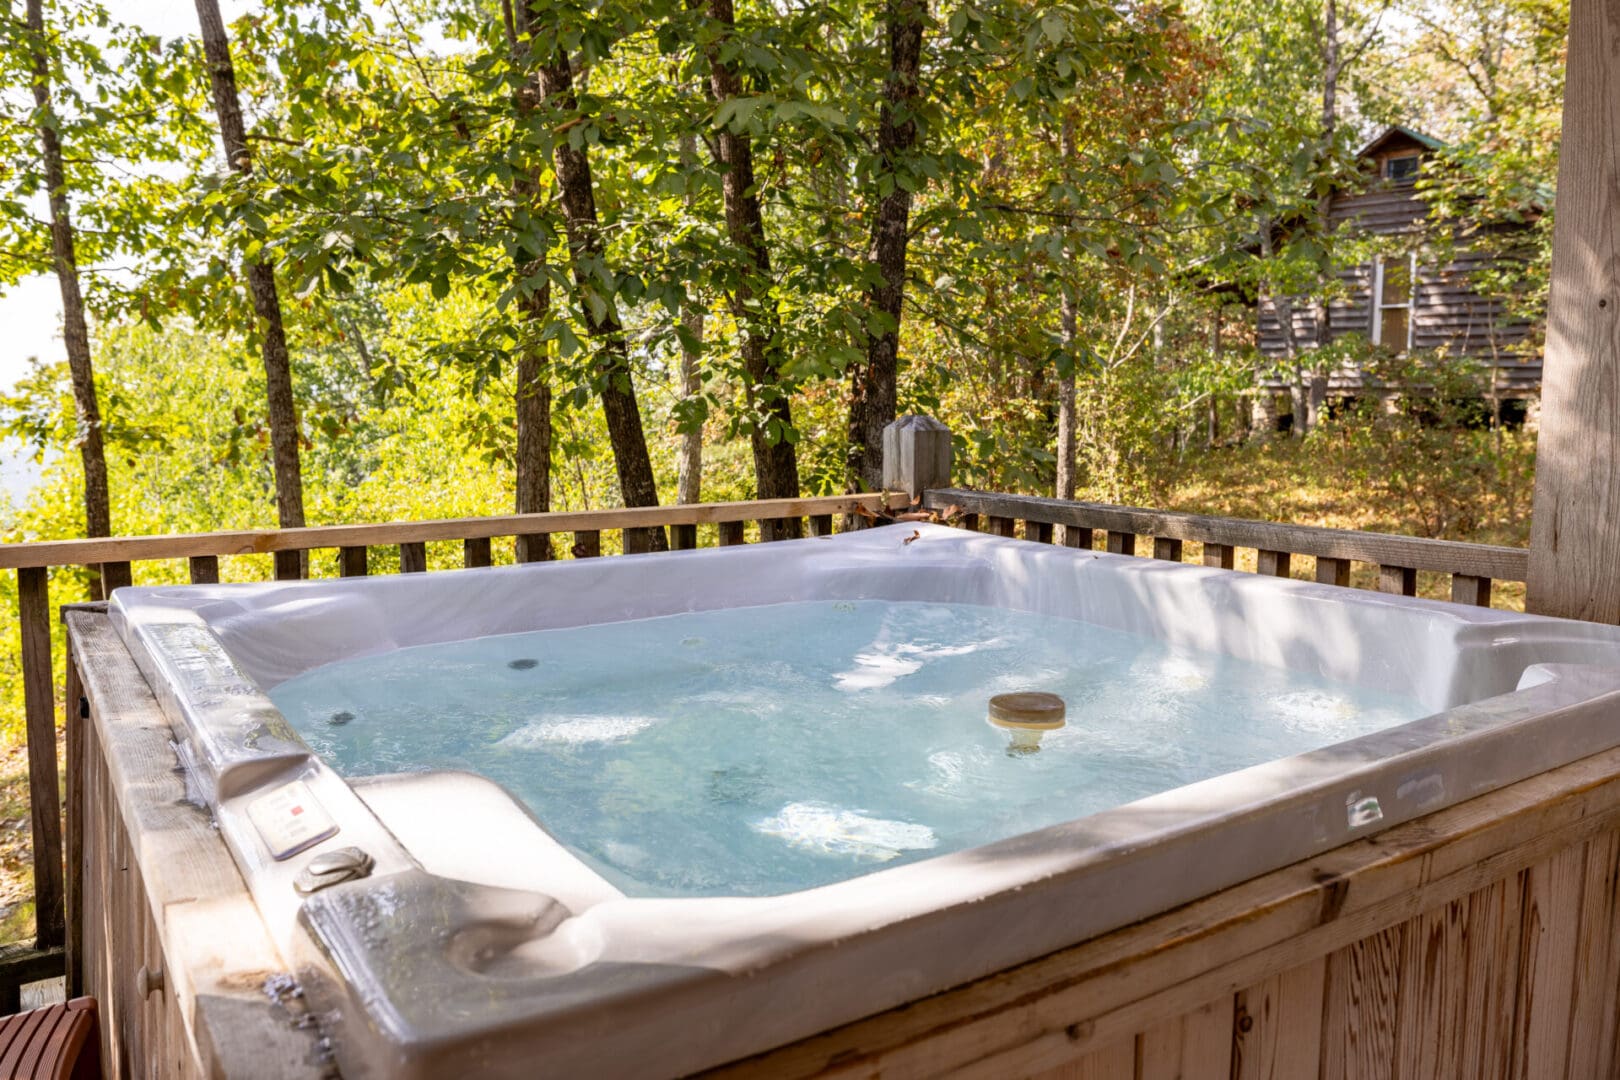 A hot tub on the deck of a cabin.